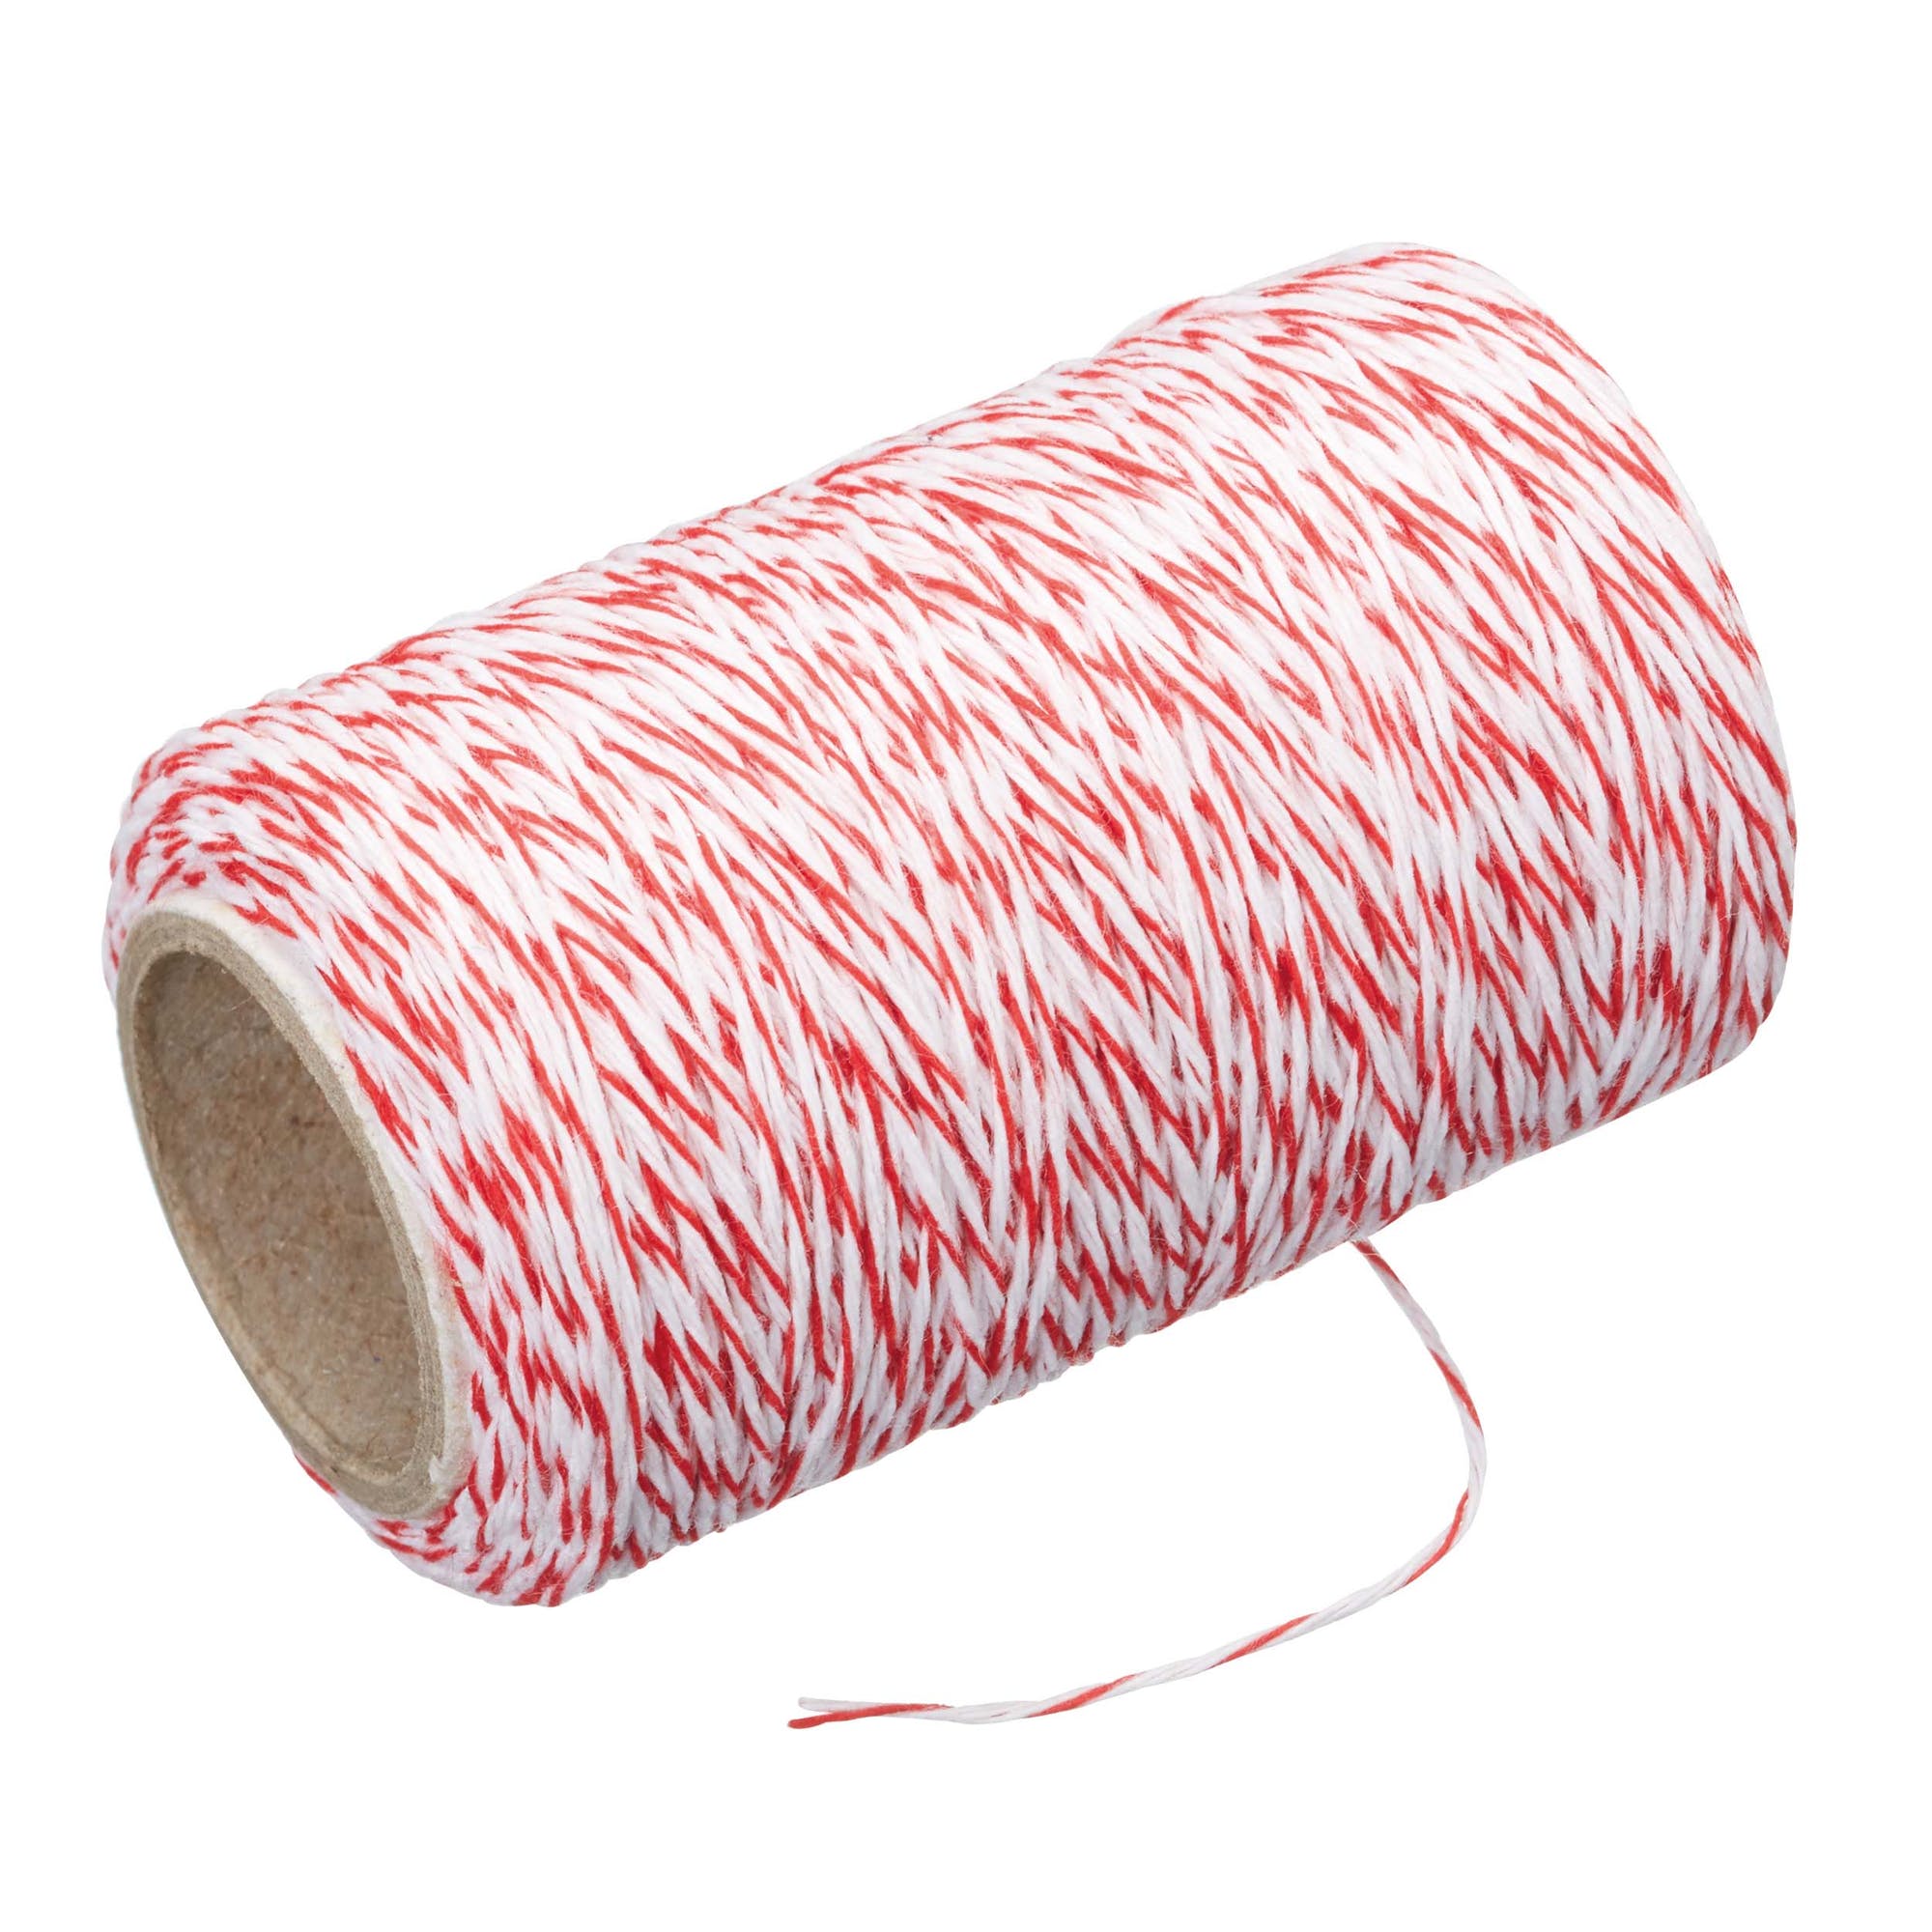 KitchenCraft Butcher's Twine / Cooking String - The Cooks Cupboard Ltd